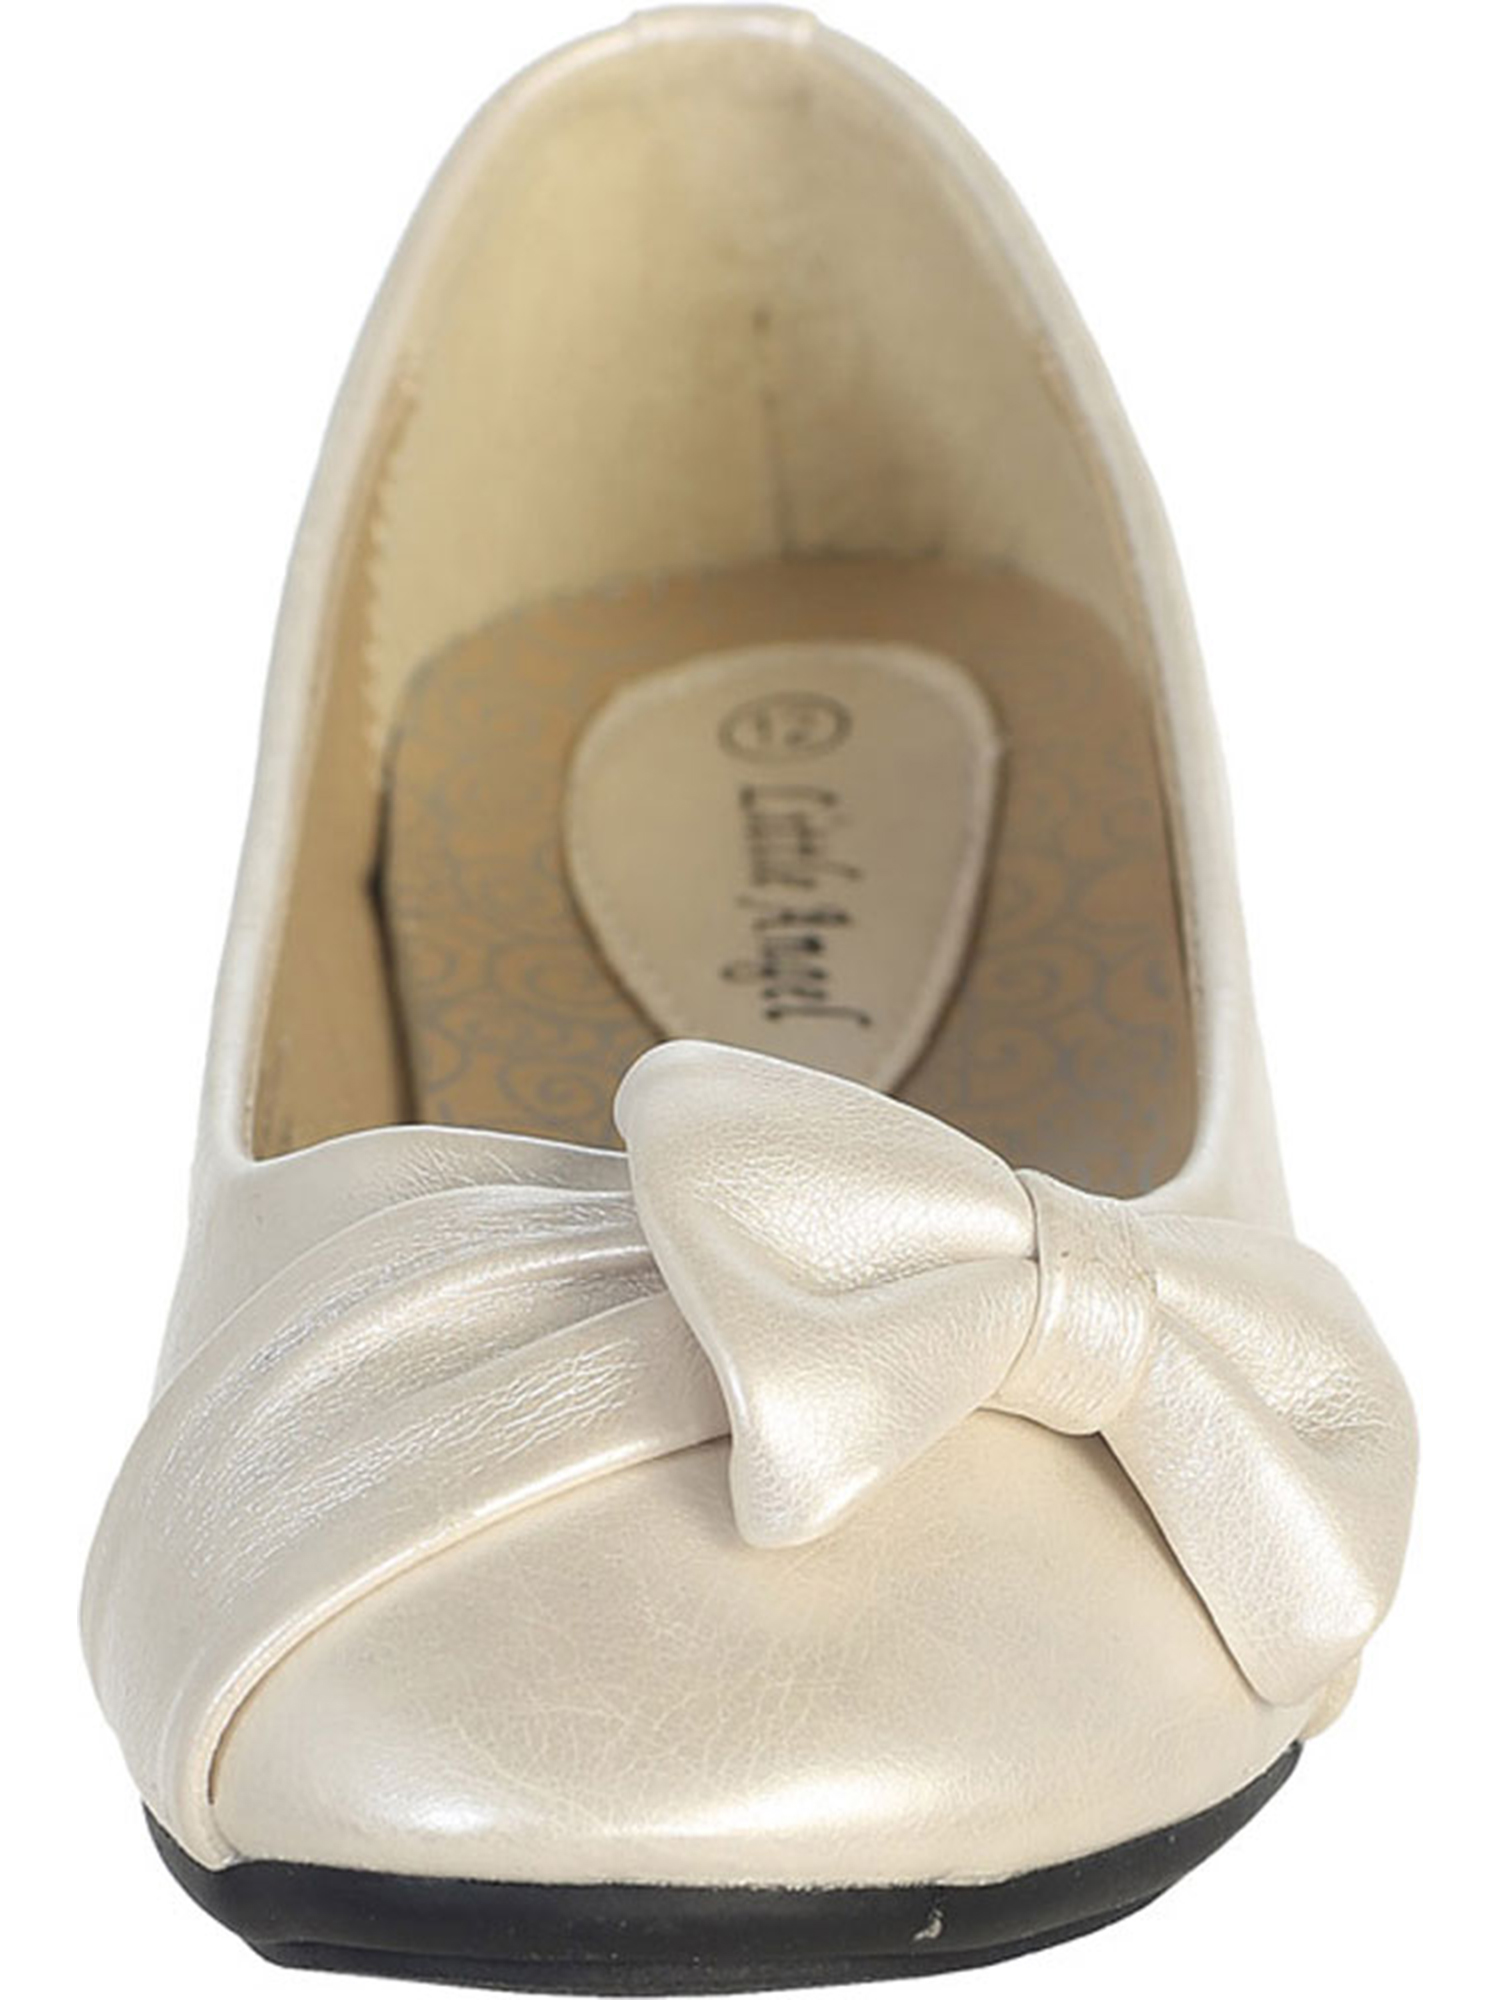 Ivory Pearl Girl's Flat Shoes with Side Bow Girl 2